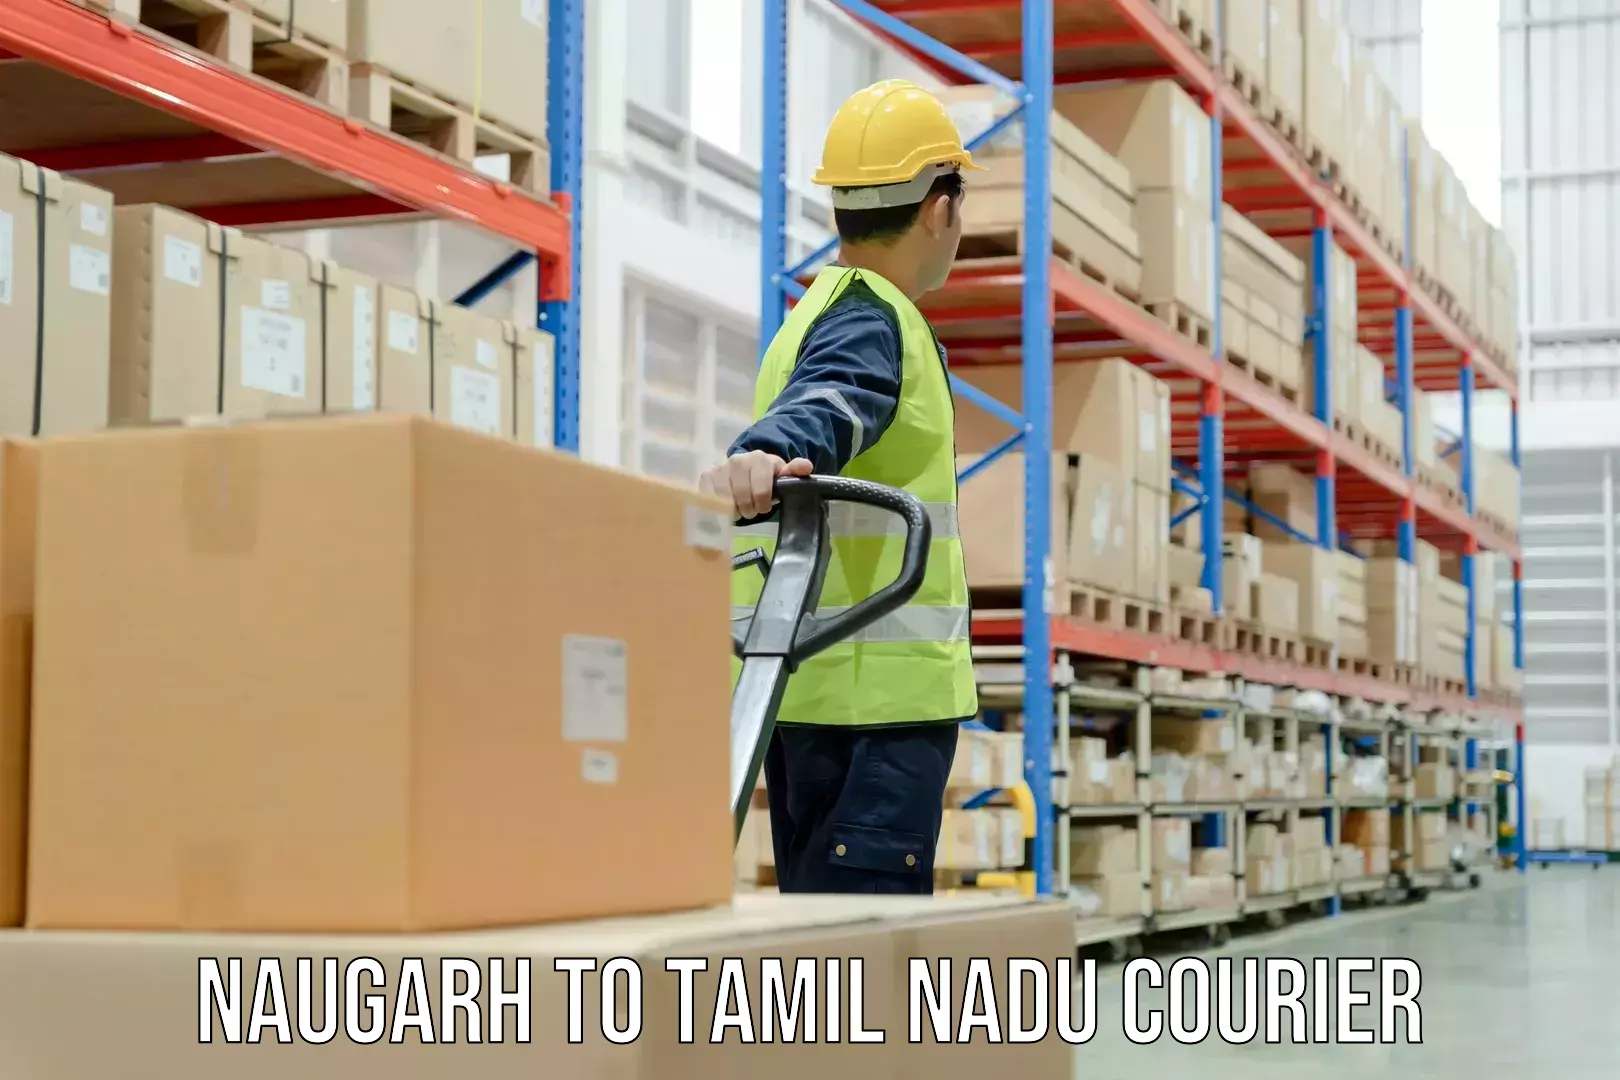 Courier membership Naugarh to Nagercoil